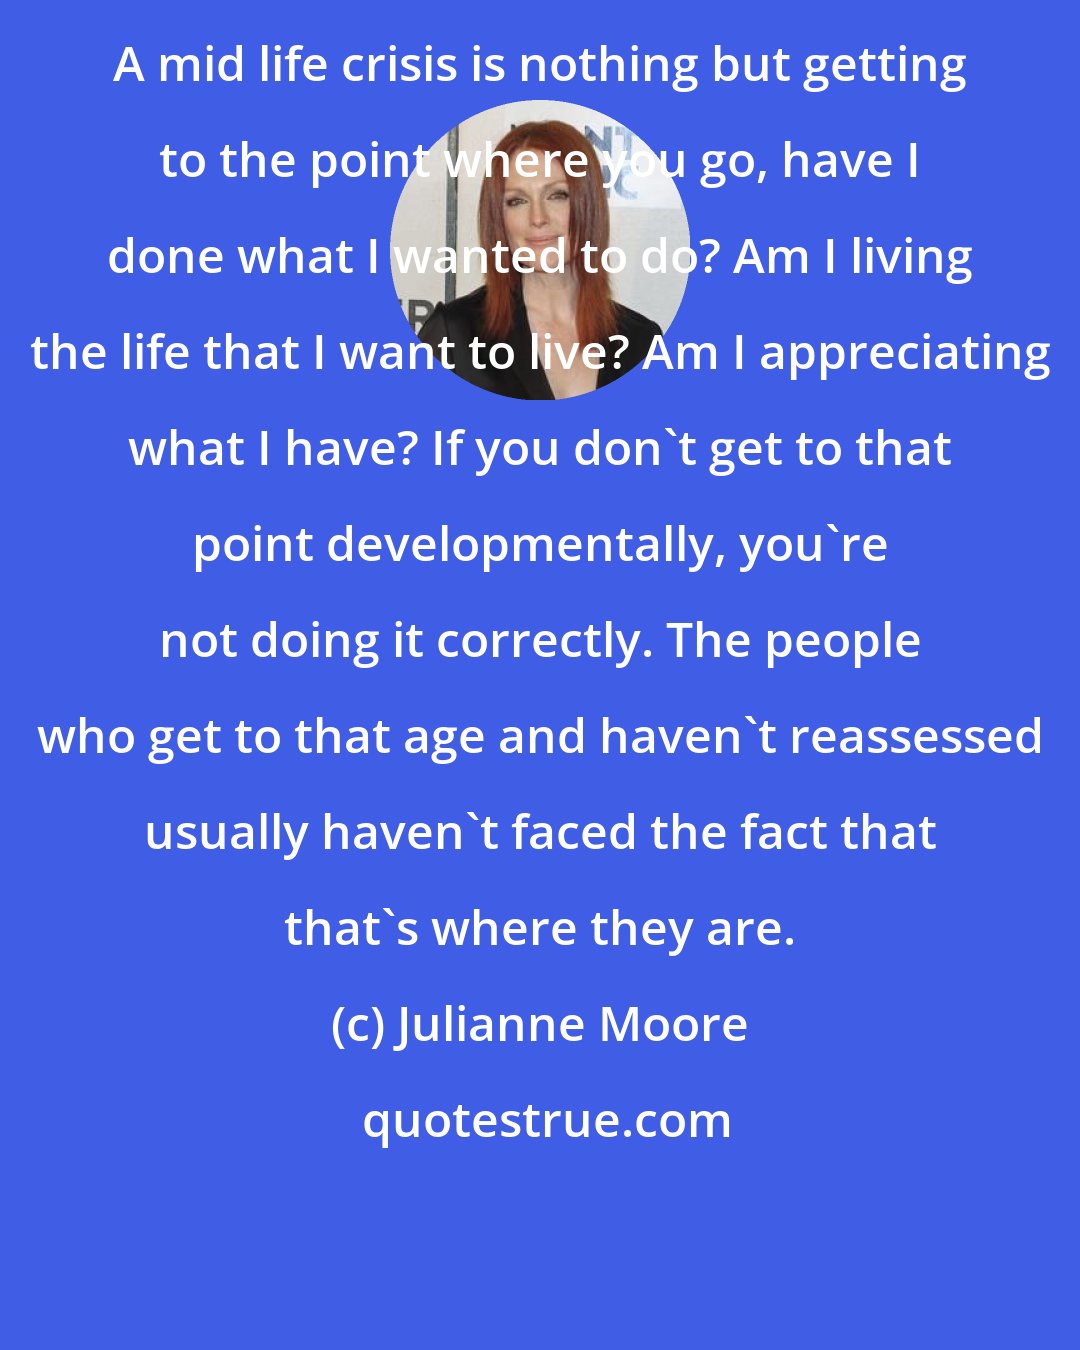 Julianne Moore: A mid life crisis is nothing but getting to the point where you go, have I done what I wanted to do? Am I living the life that I want to live? Am I appreciating what I have? If you don't get to that point developmentally, you're not doing it correctly. The people who get to that age and haven't reassessed usually haven't faced the fact that that's where they are.